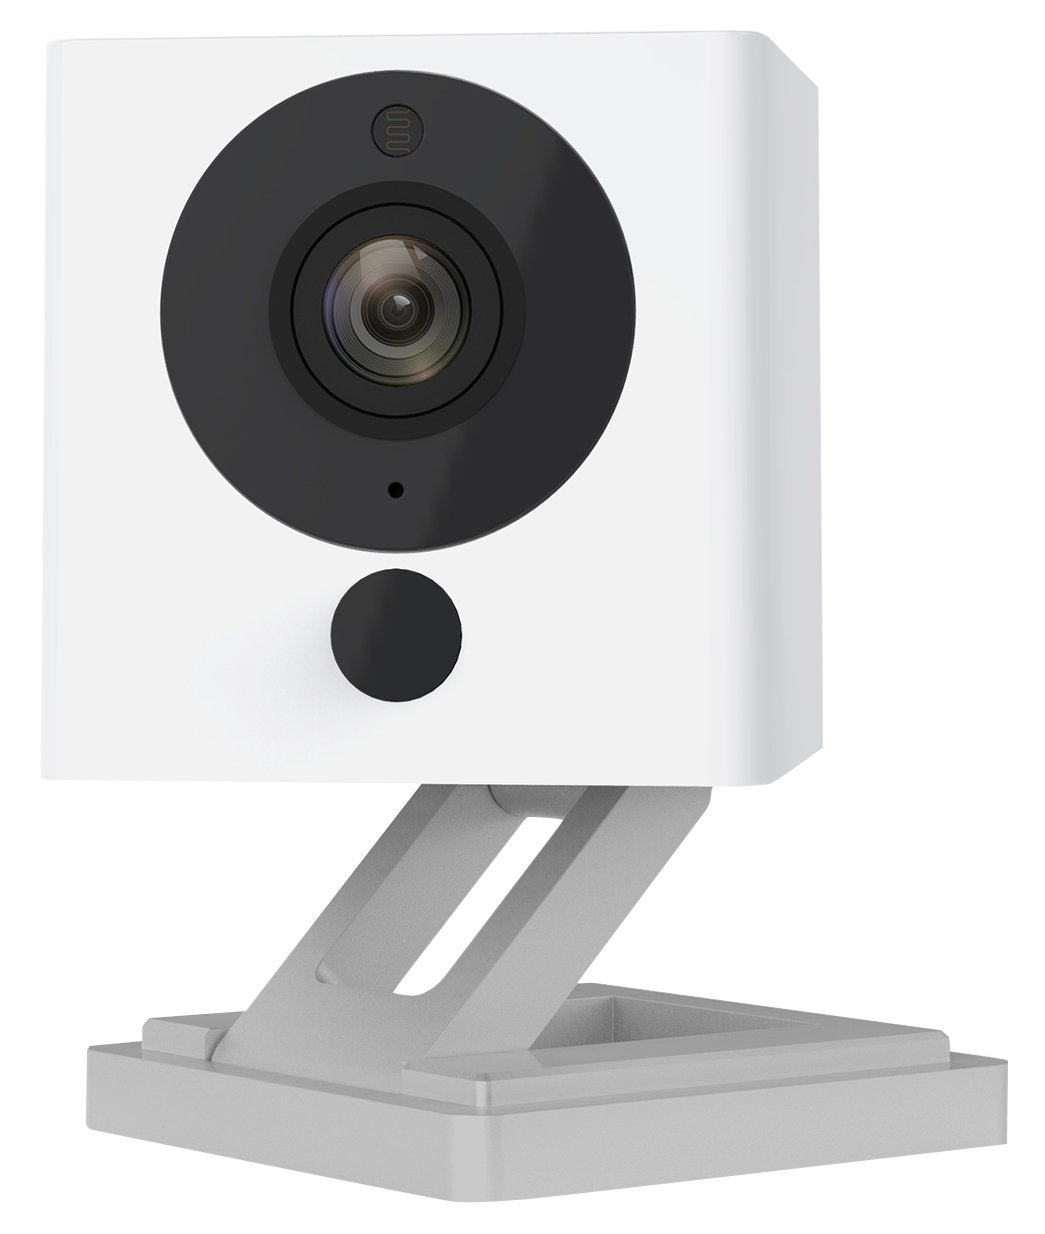 Wyze 1080p HD Indoor Wireless Smart Home Camera with Night Vision and 2-Way Audio